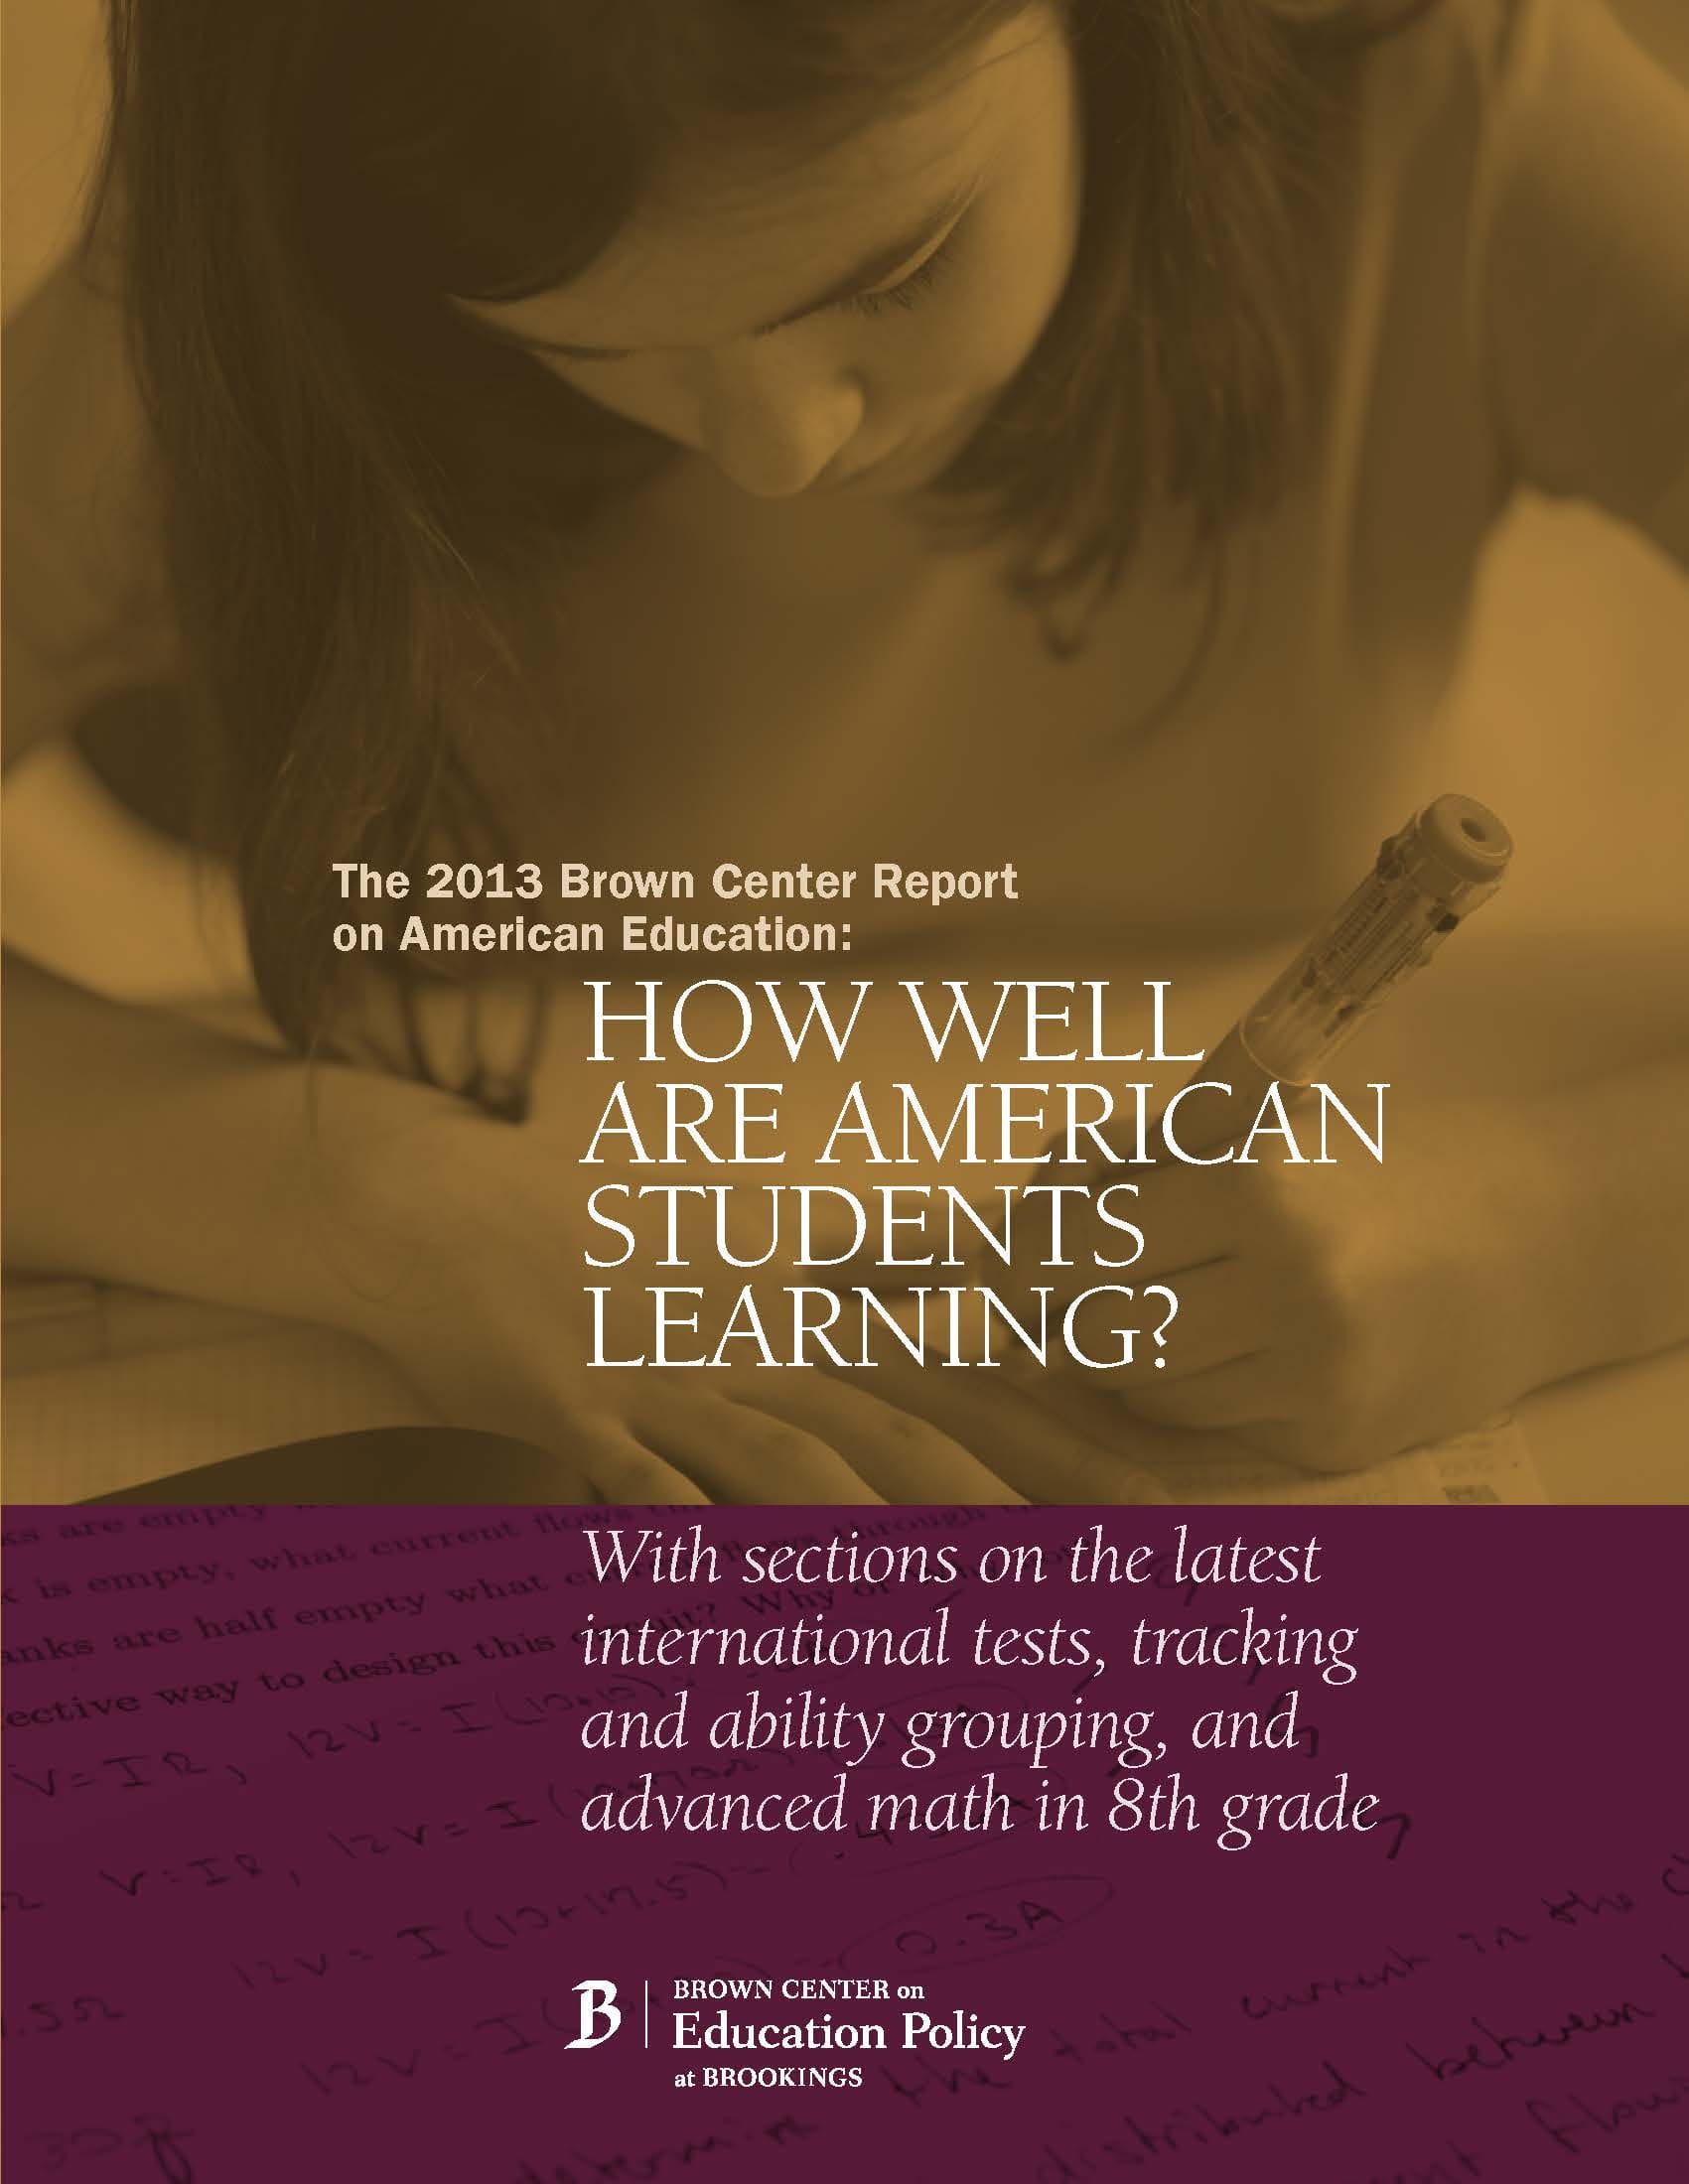 The 2013 Brown Center Report on American Education